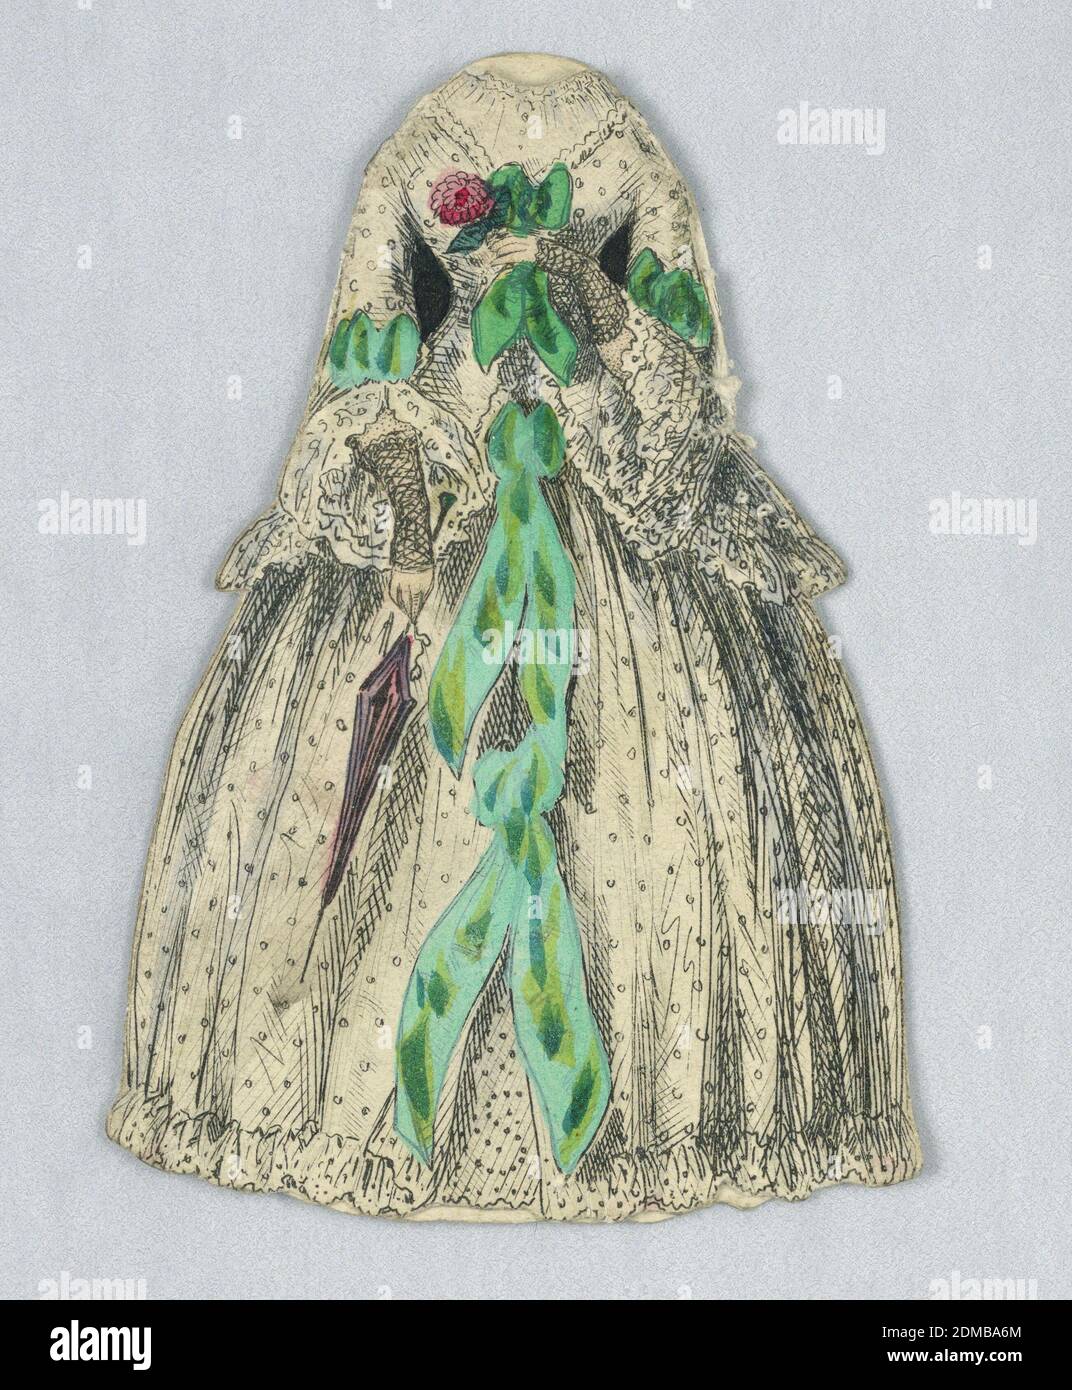 Paper Doll Costume with Dotted Pattern and Emerald Green Bows, Lithograph,  brush and watercolors on cream heavy wove paper, This cream-colored dress  has a dotted pattern with emerald green bow accents. The